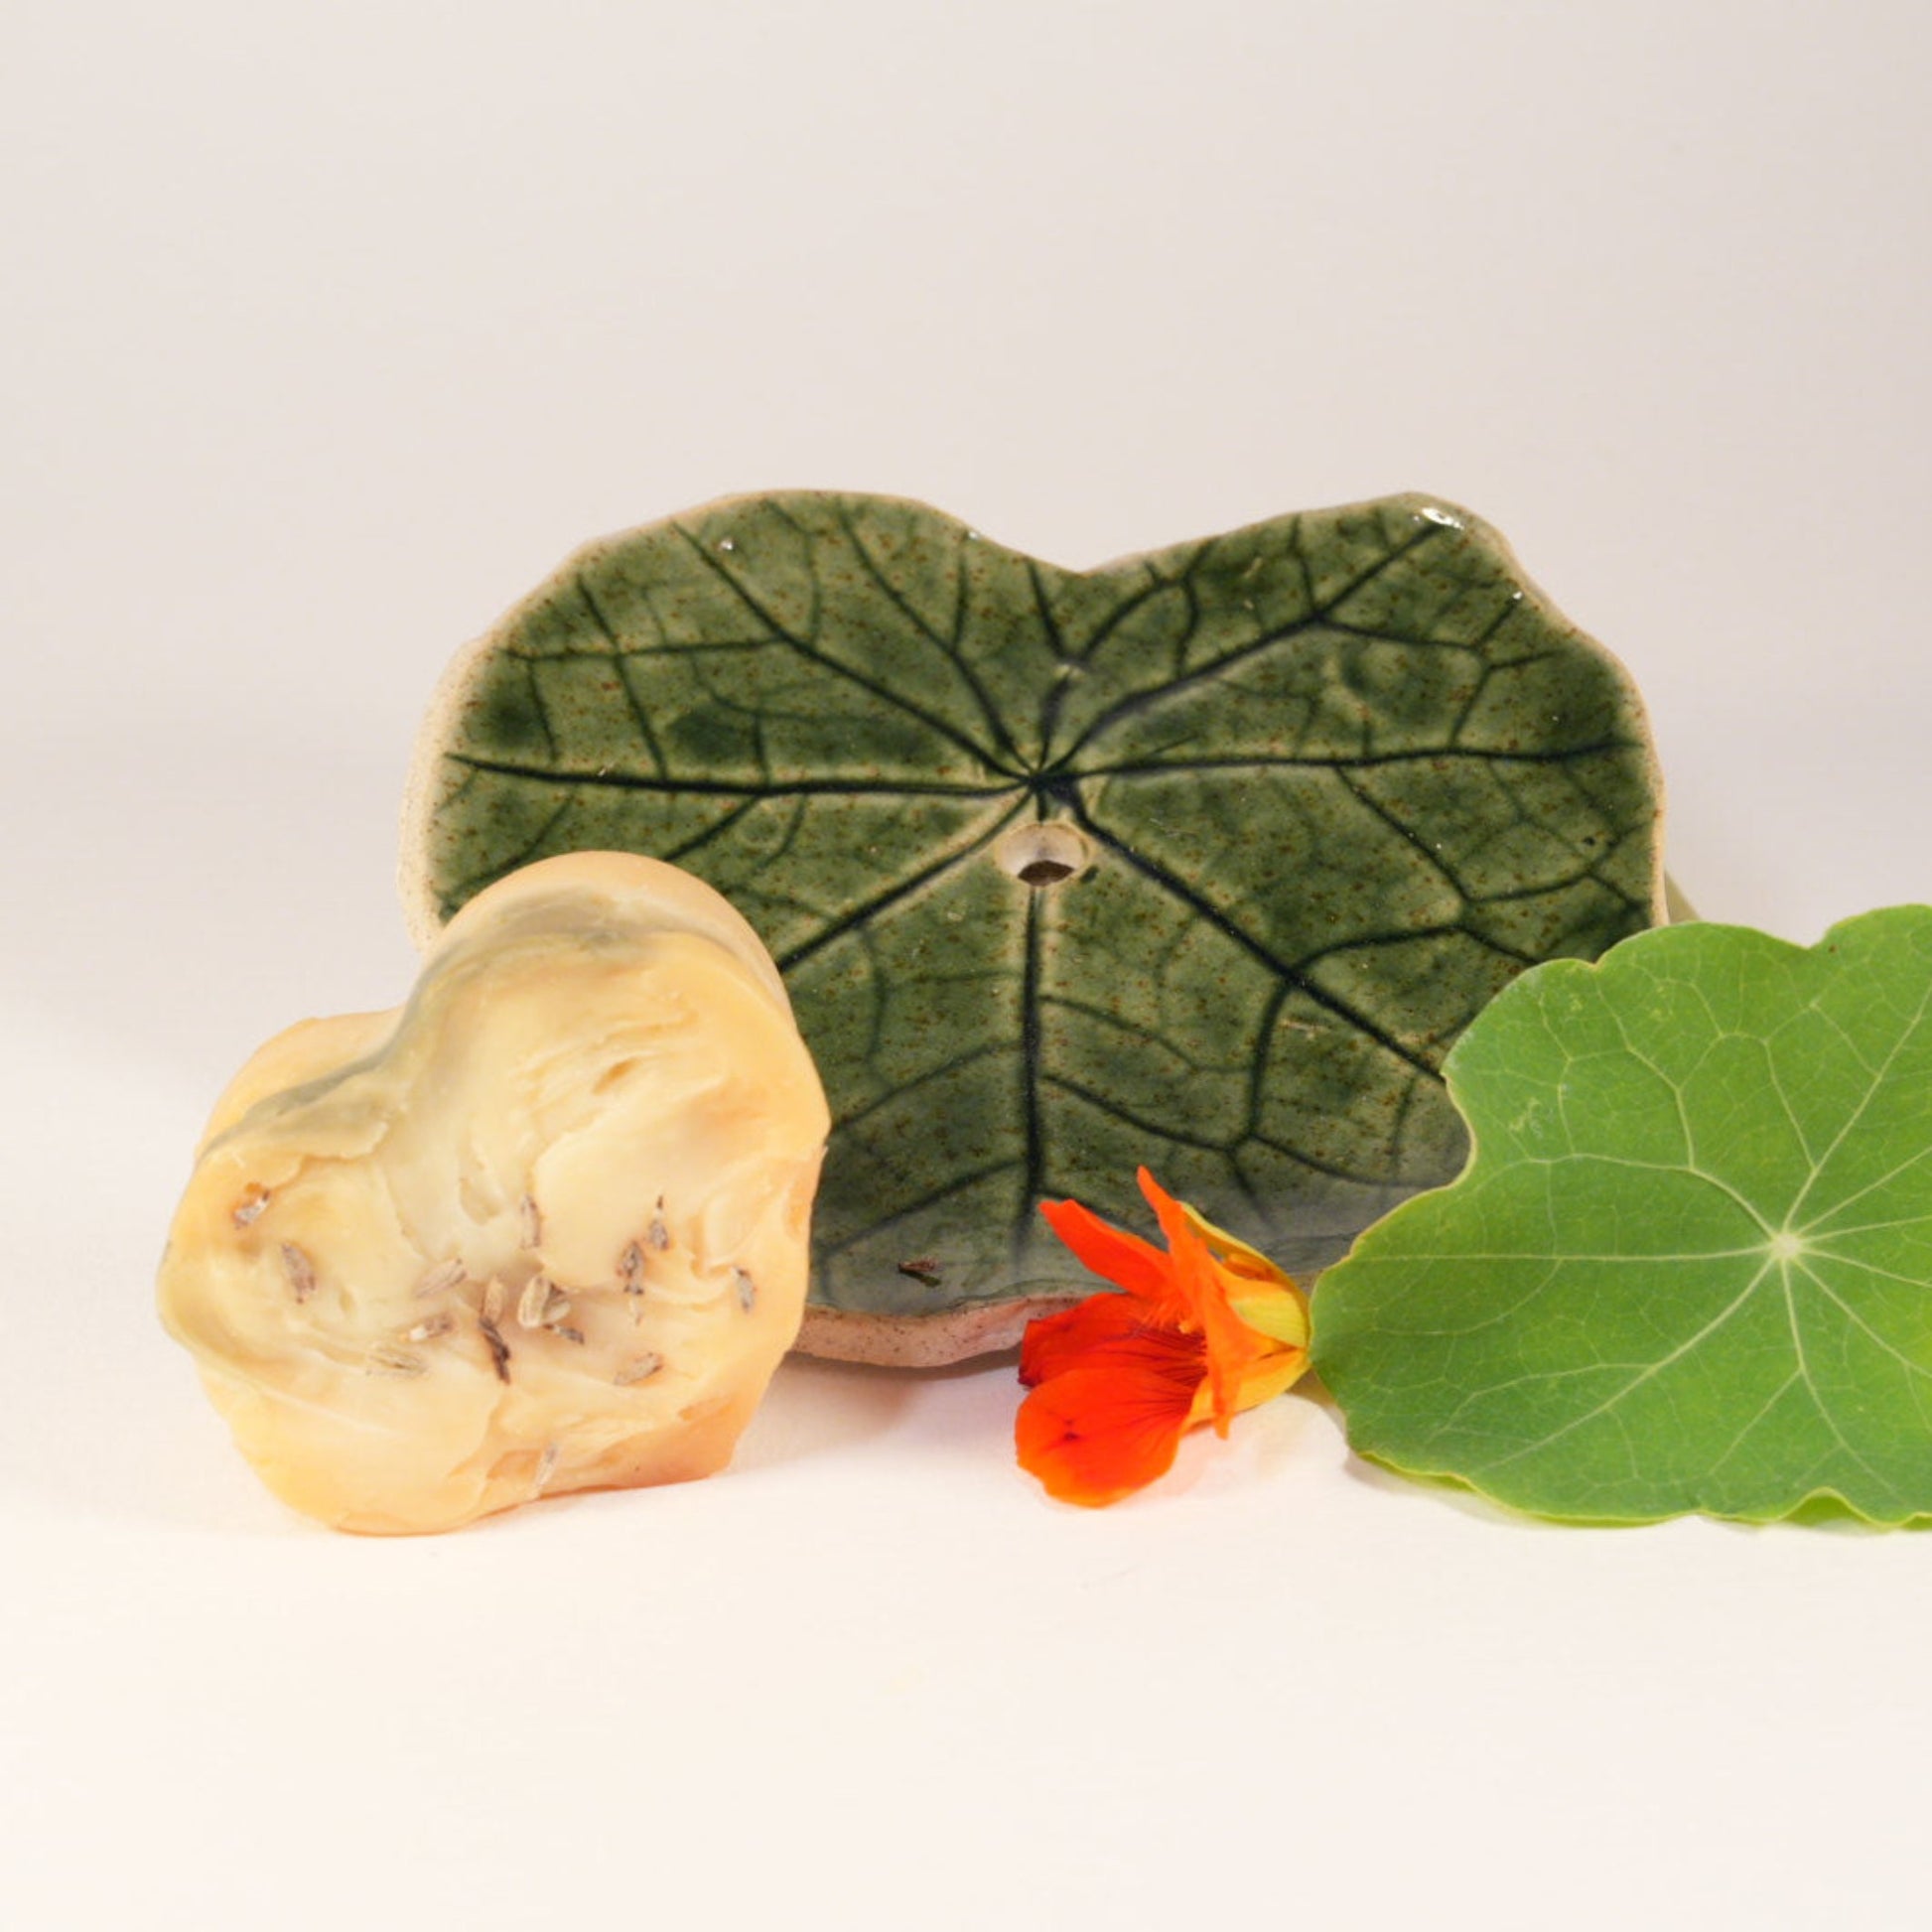 Nasturtium Soap Dish with Green Goddess Cleansing Bar and flower